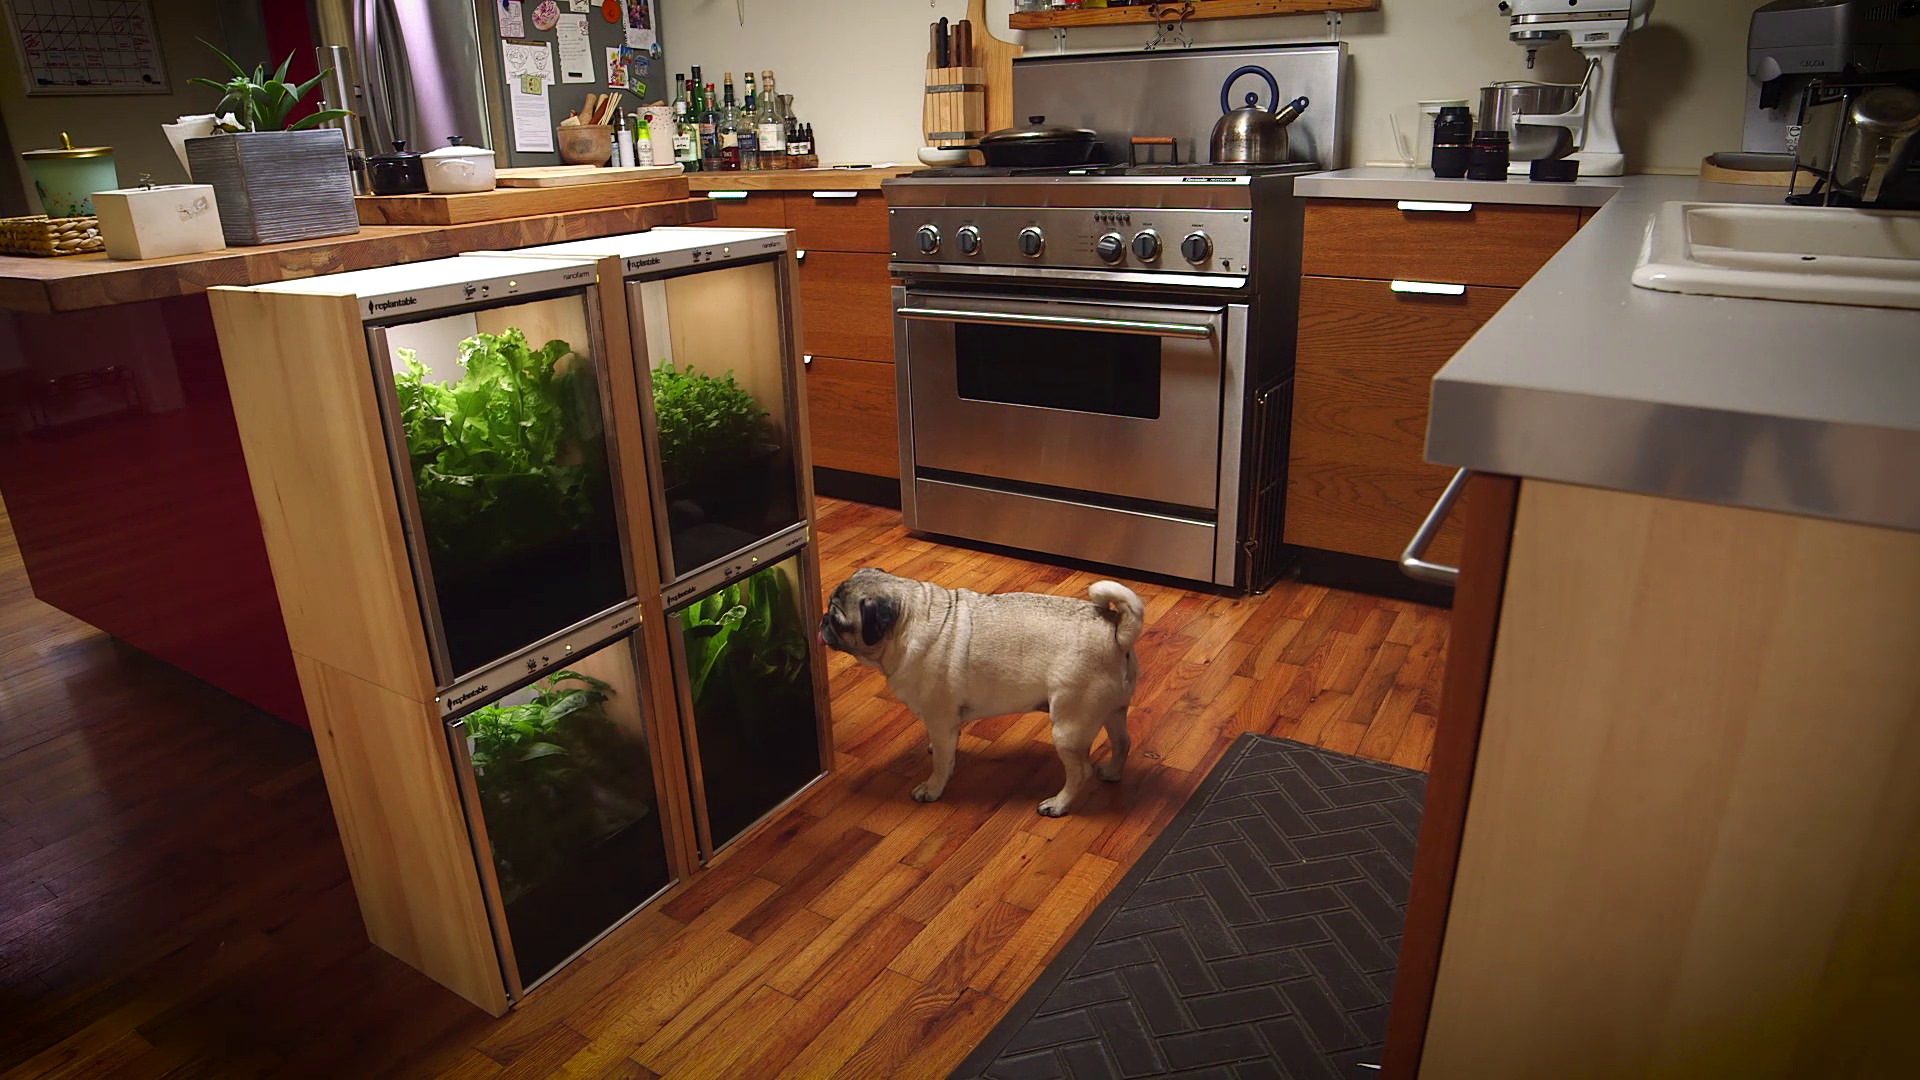 The Nanofarm is a tiny modular farm that fits on a kitchen countertop. It grows vegetables, herbs and salad greens. It was designed by Replantable, a startup launched by recent Georgia Tech graduates Ruwan Subasinghe and  Alex Weiss. Replantable went through Georgia Tech's Startup Summer program in 2015. The 12-week program helps student teams launch startups based off their ideas and prototypes.The Nanofarm cabinet includes a water tray, LED grow lights and a plant pad. The plant pads are soil-free, p